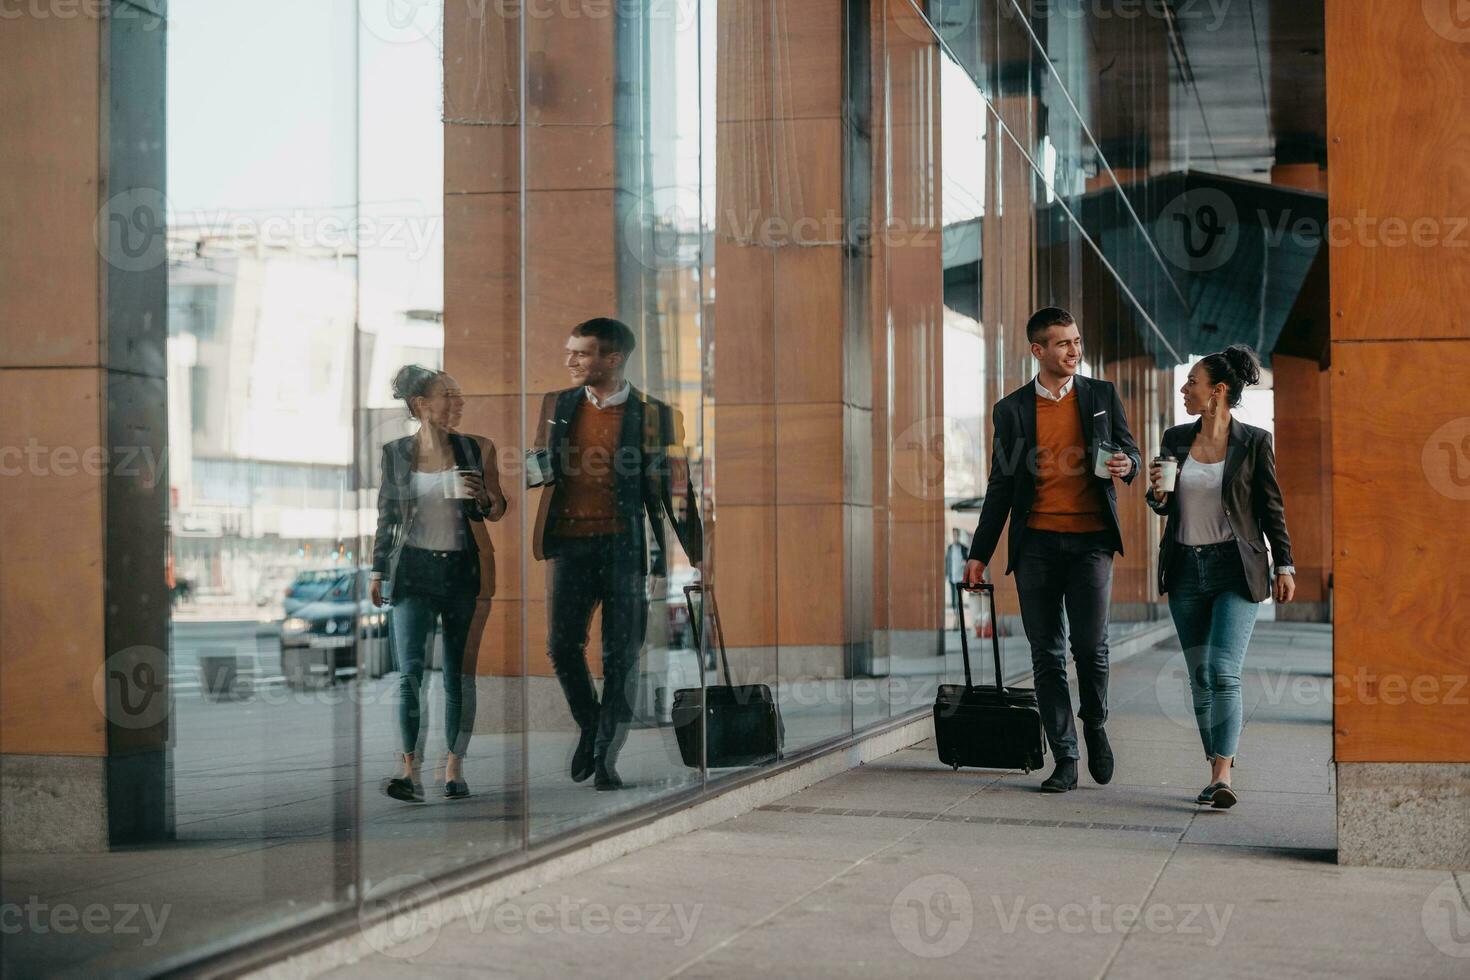 Business man and business woman talking and holding luggage traveling on a business trip, carrying fresh coffee in their hands.Business concept photo